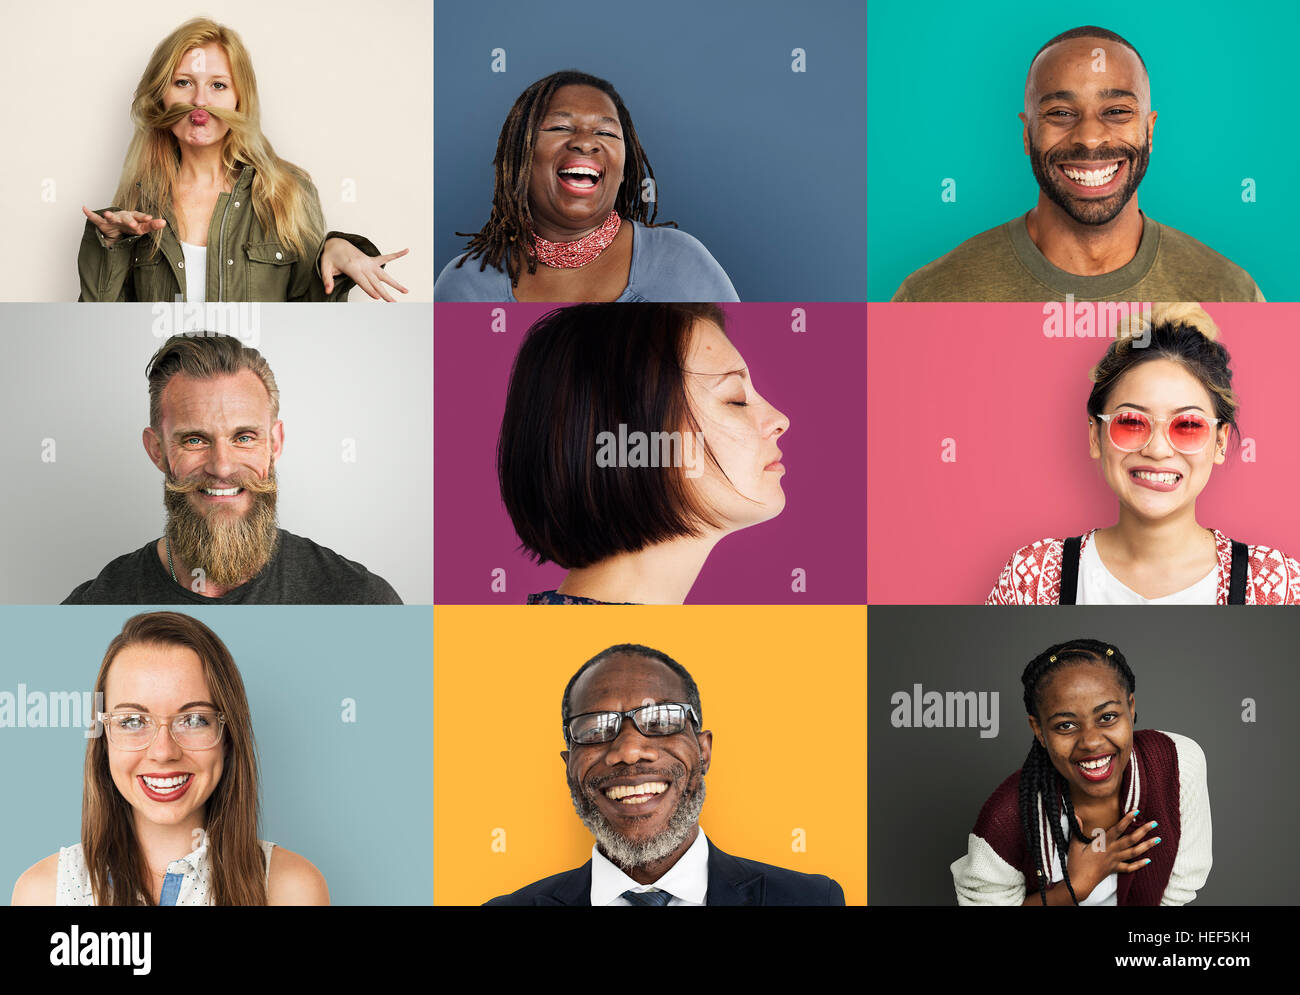 Diverse Group People Photo Collage Concept Stock Photo